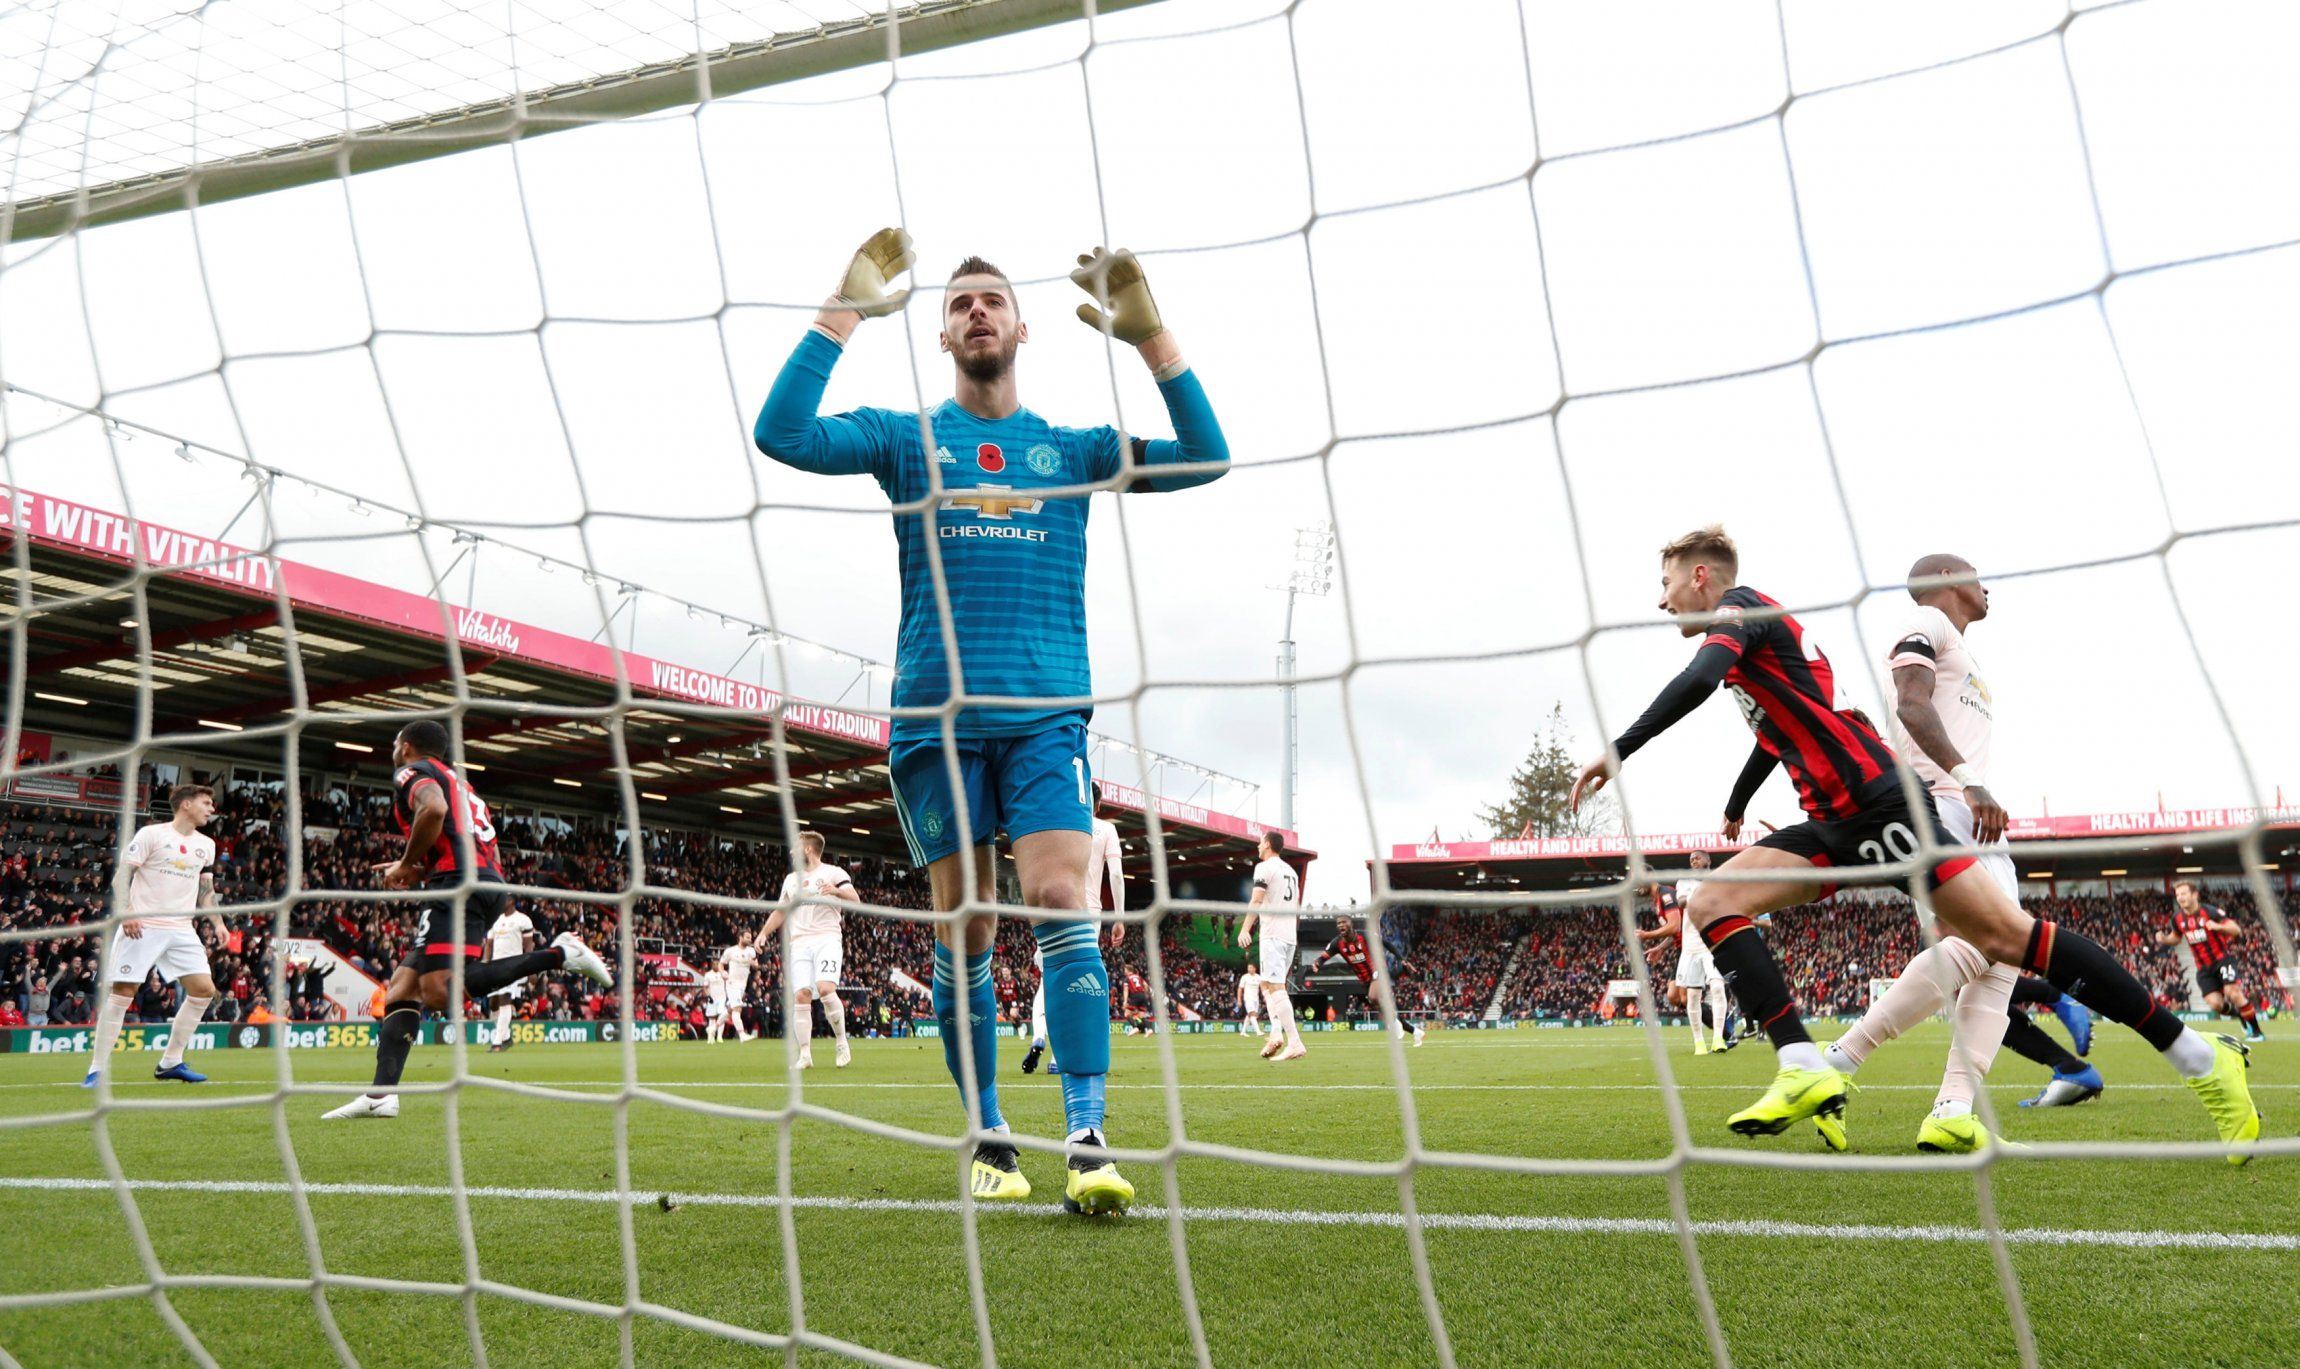 Bournemouth's Callum Wilson scores their first goal v Manchester United